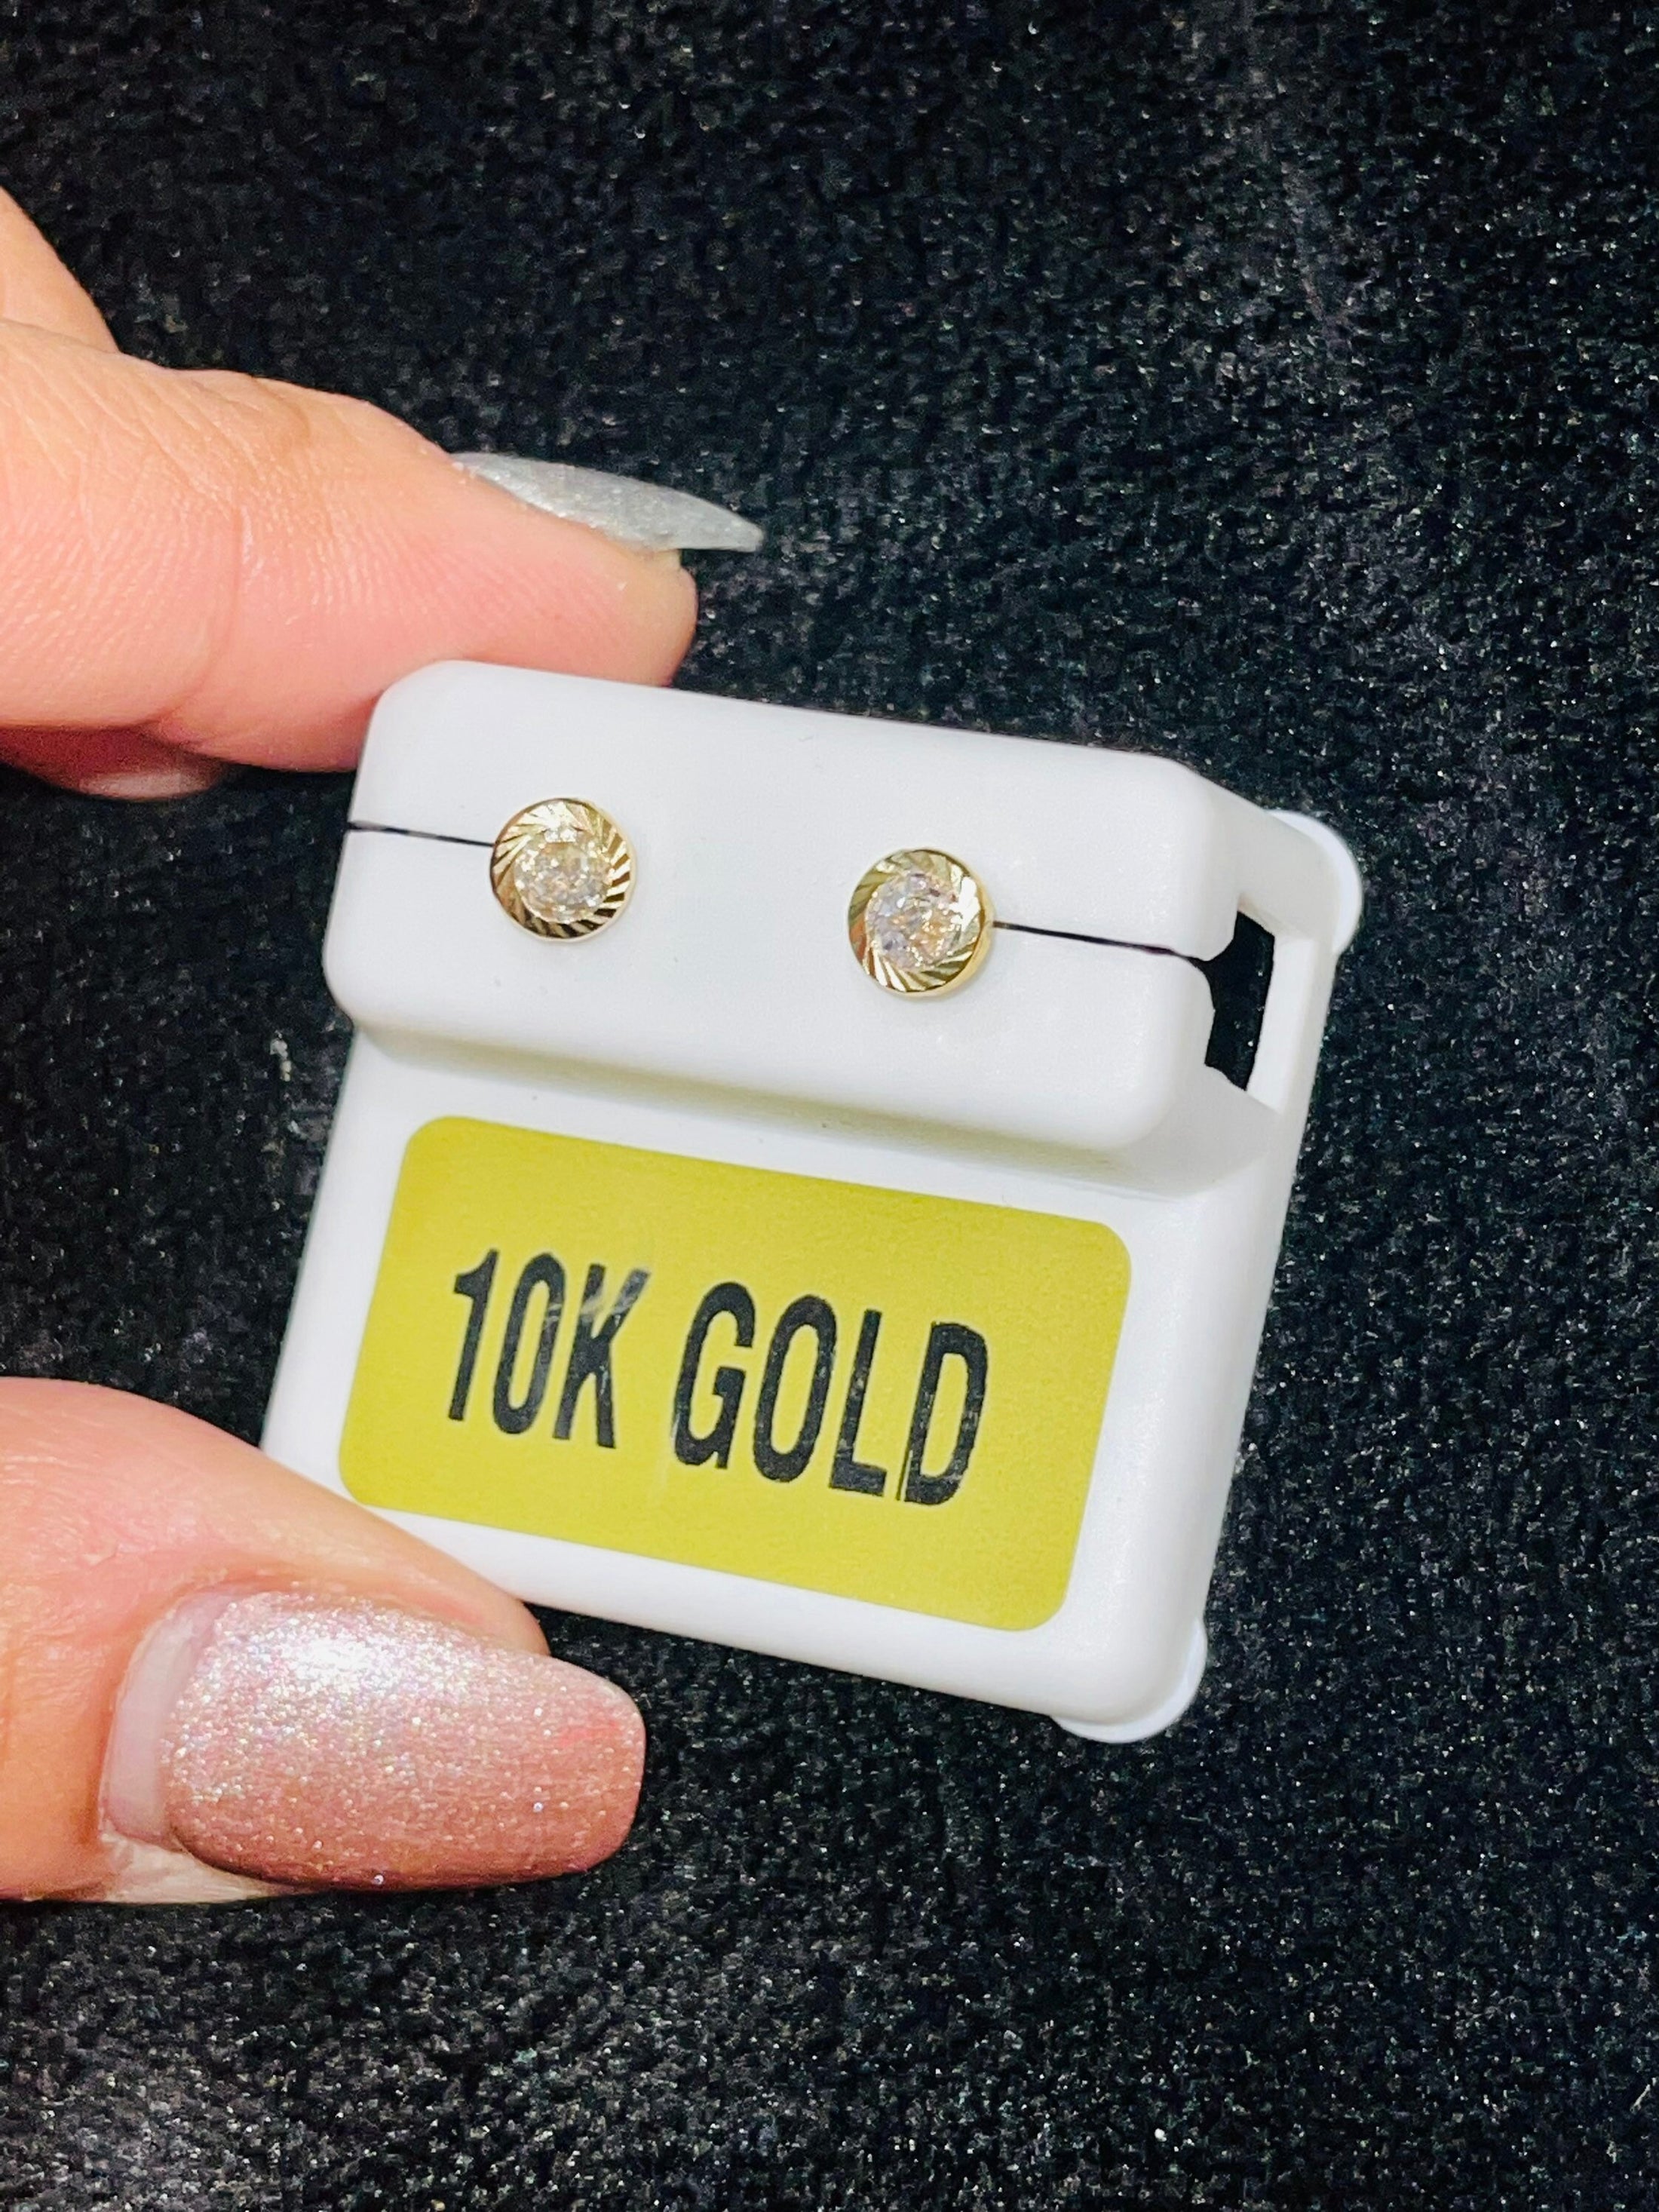 10k solid gold round studs, beautifully designed for everyday wear, eat gif for all occasions, all ages, unisex, Huge sale, Free gift wrap,